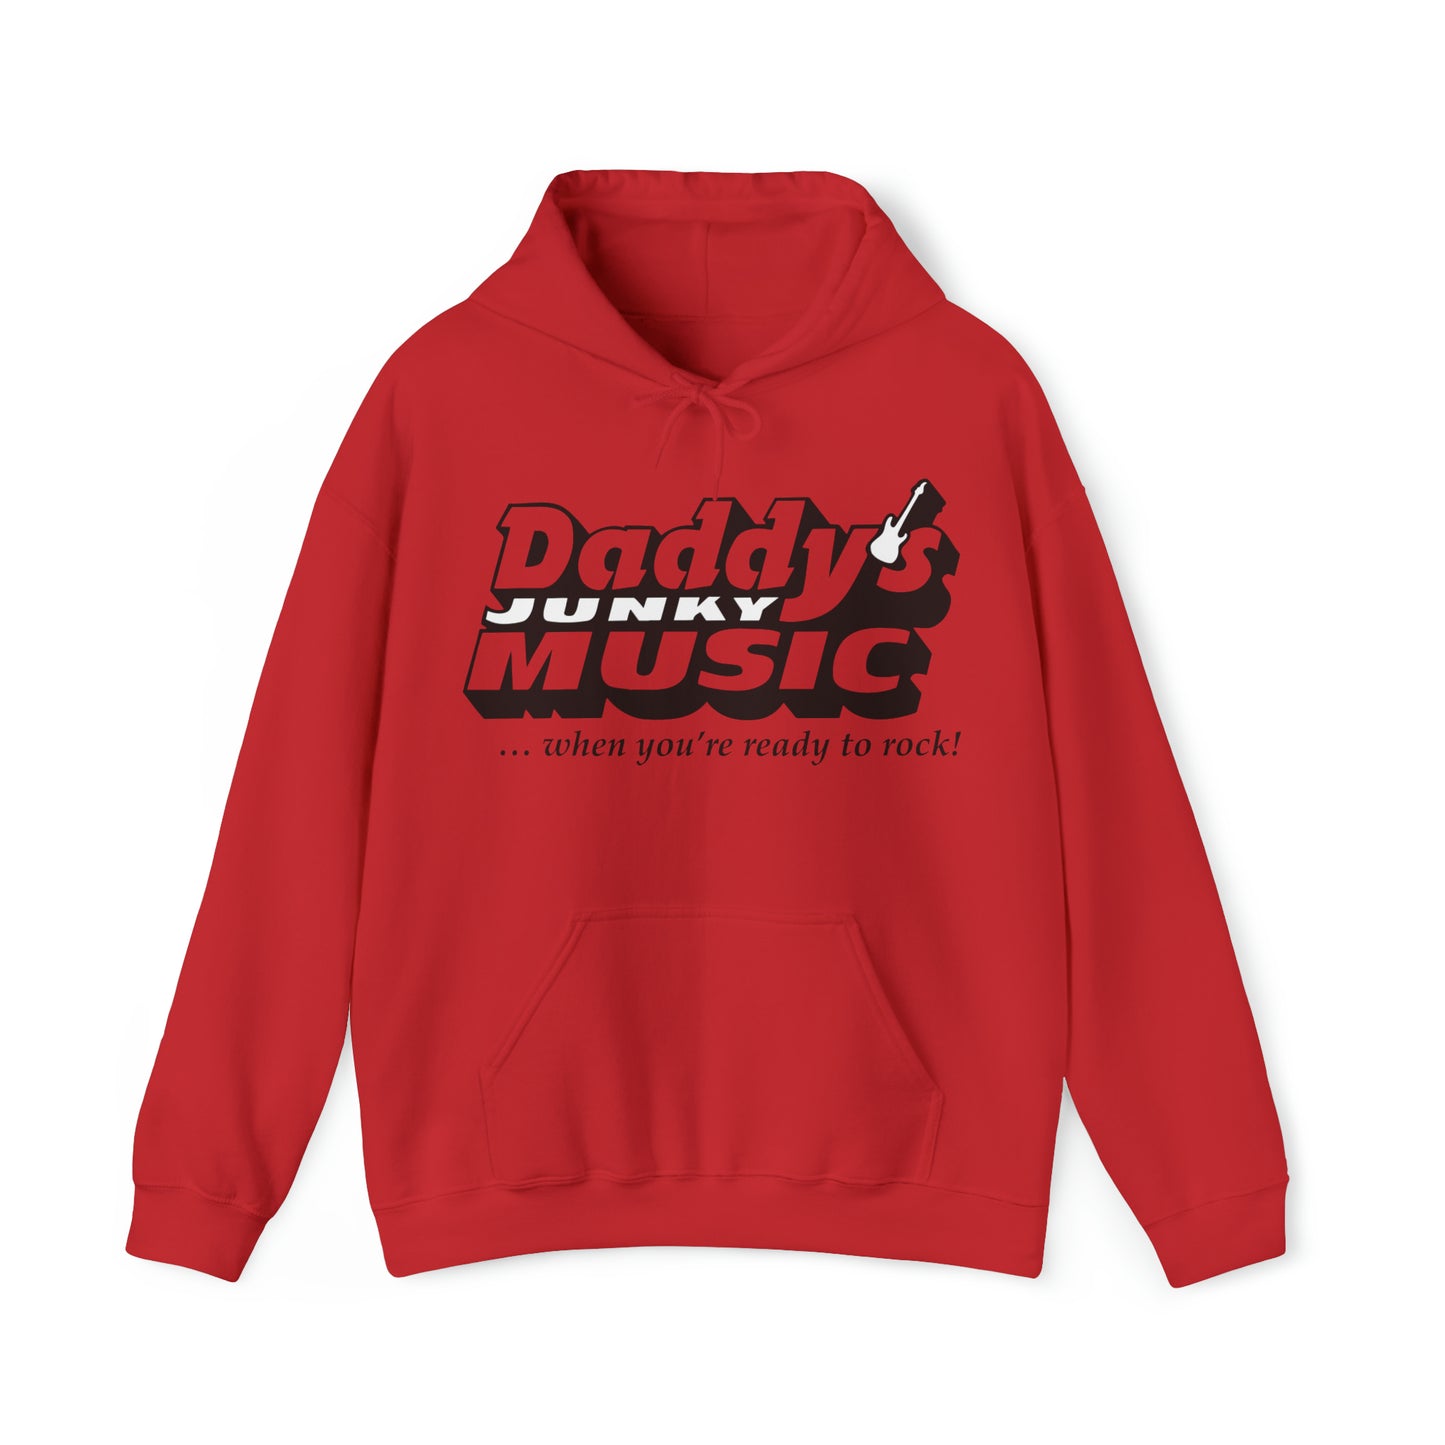 Daddy's Junky Music Hoody